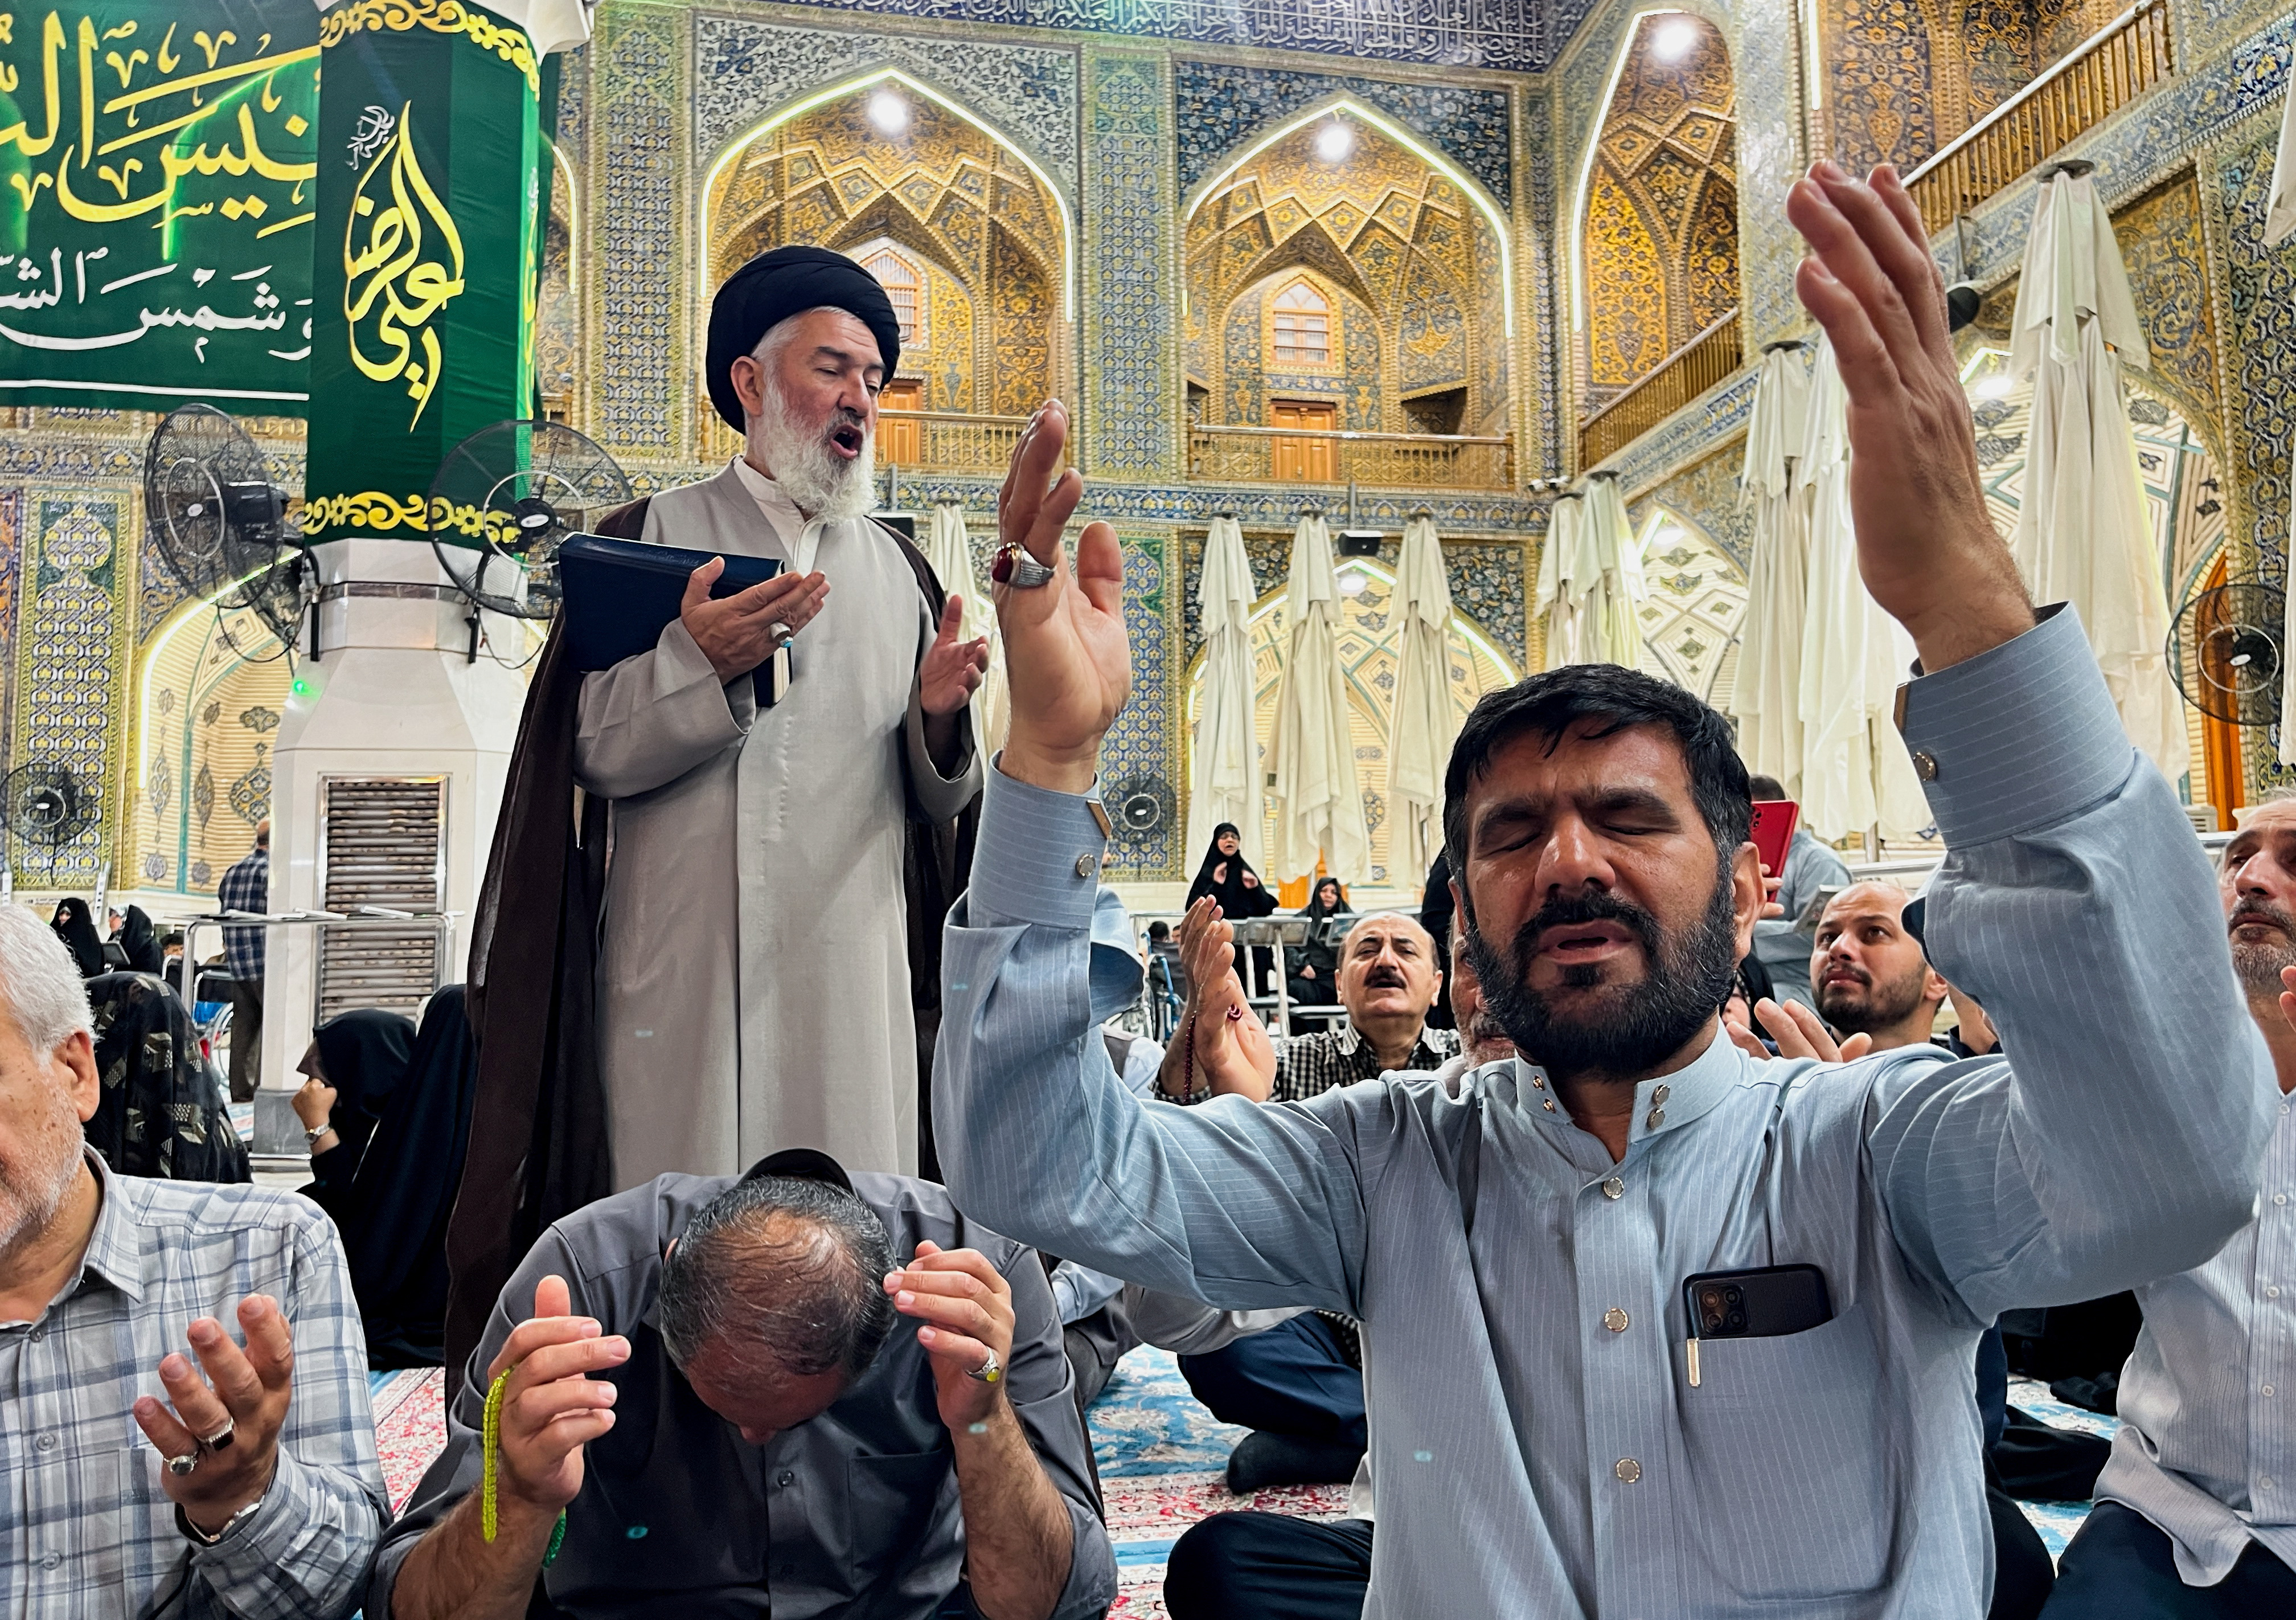 Iranian Shi'ite pilgrims pray for Iran's President Ebrahim Raisi following the crash of a helicopter carrying him, in Najaf